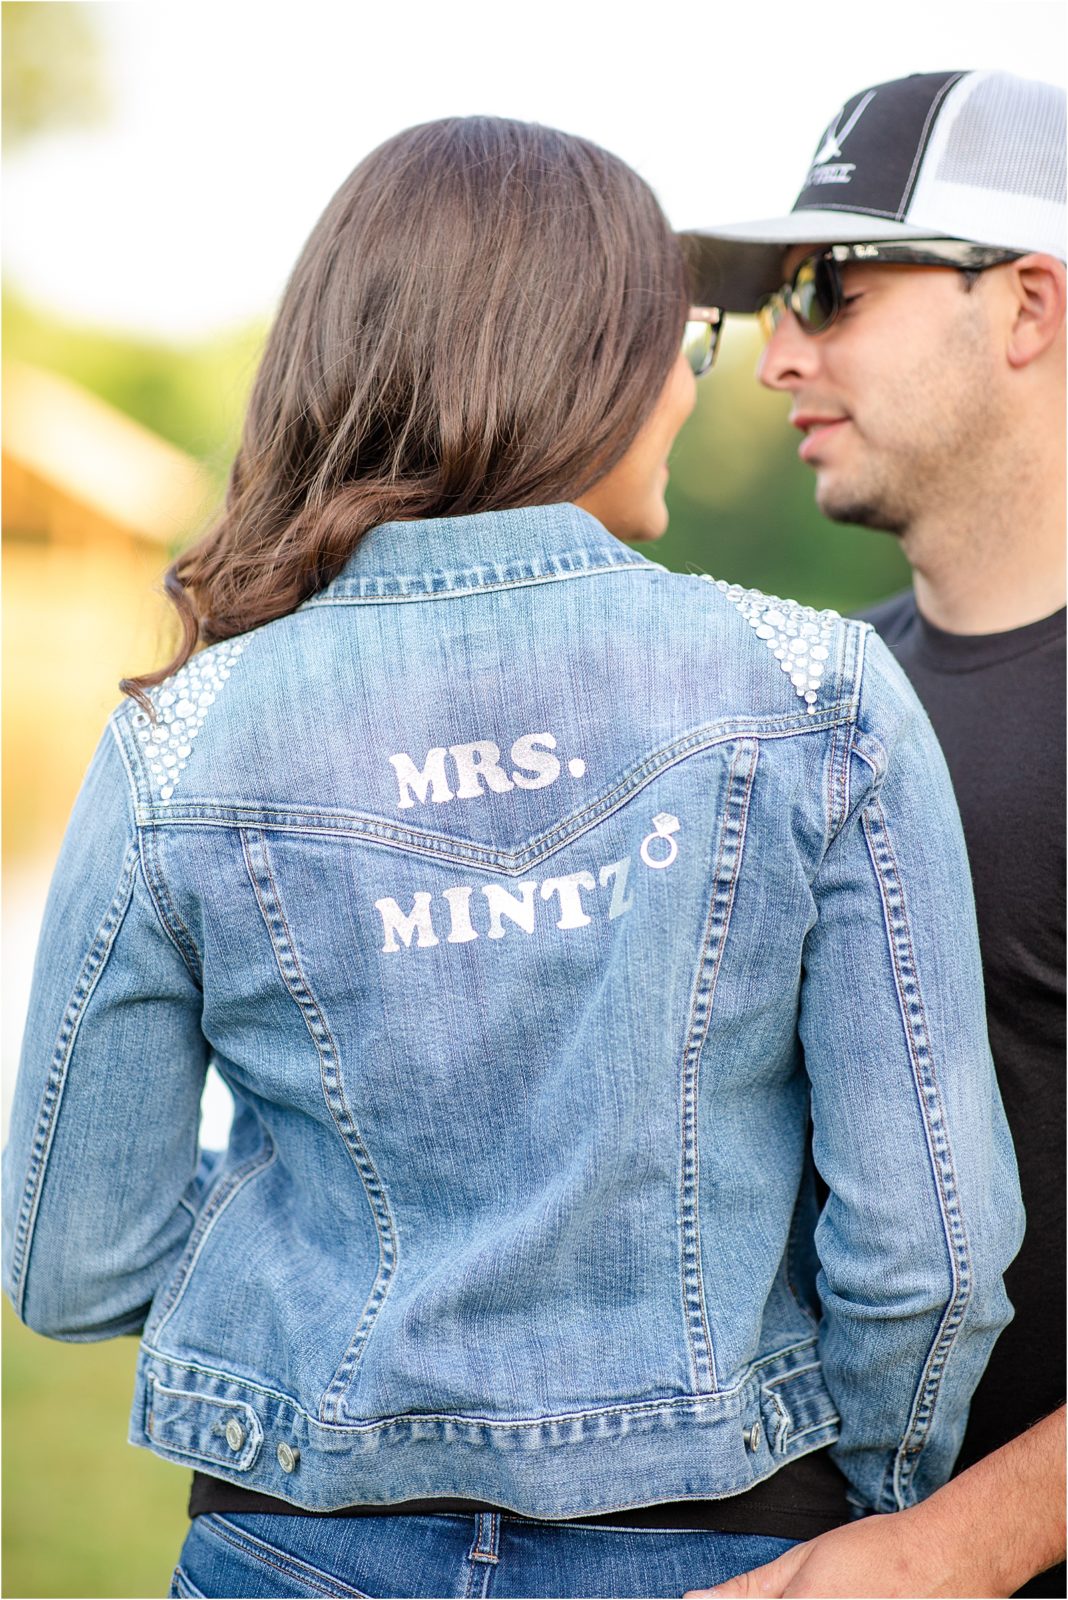 Blue Jean jacket on engaged woman for photos